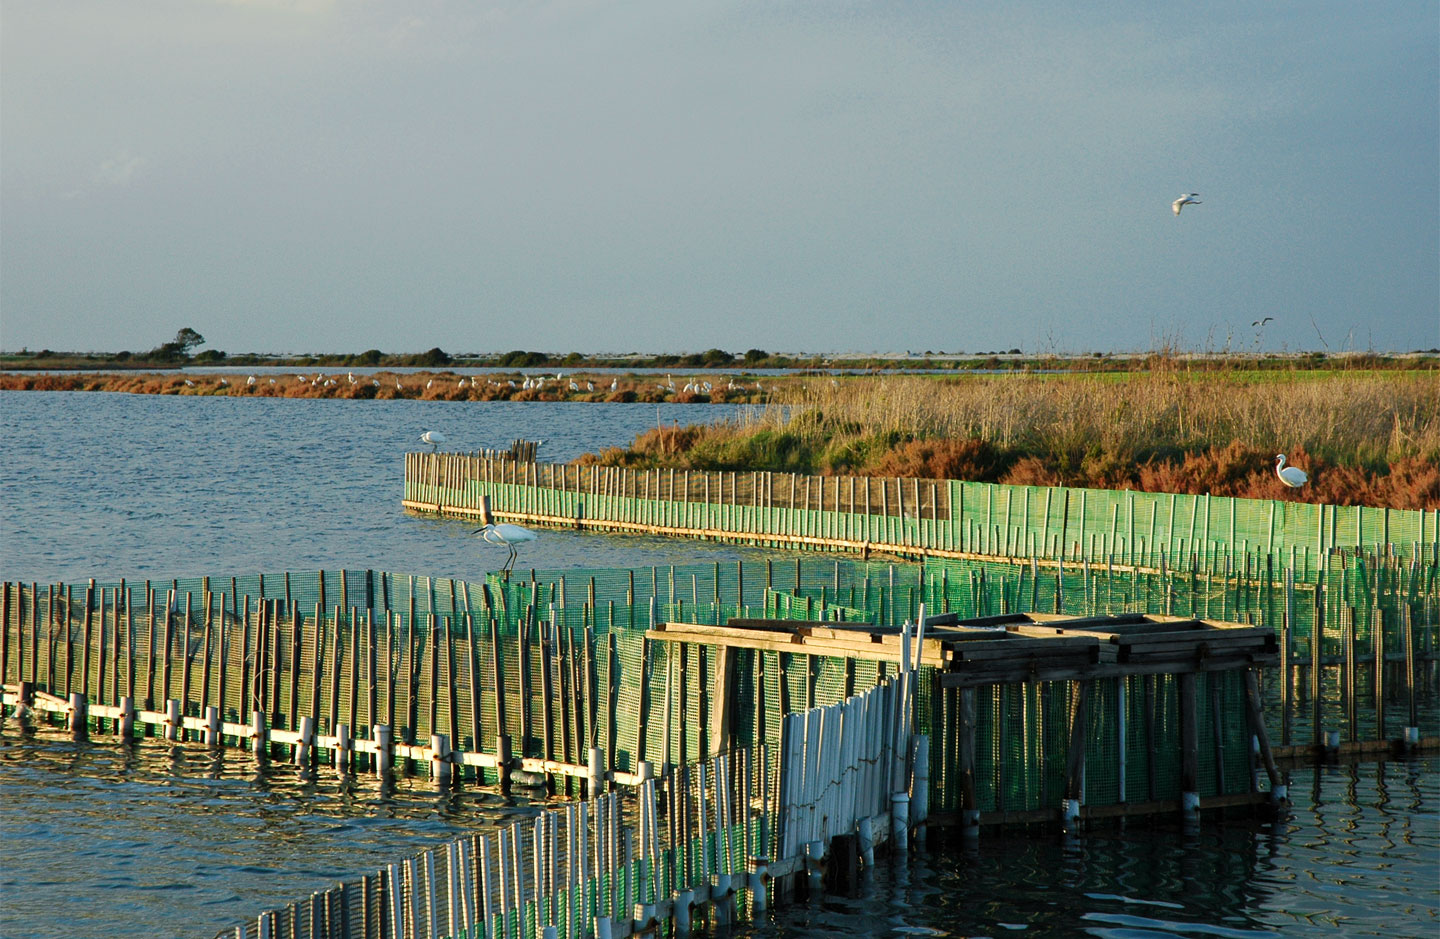 The lagoon of Lefkada | Birds resting on the remains of the ancient stilts